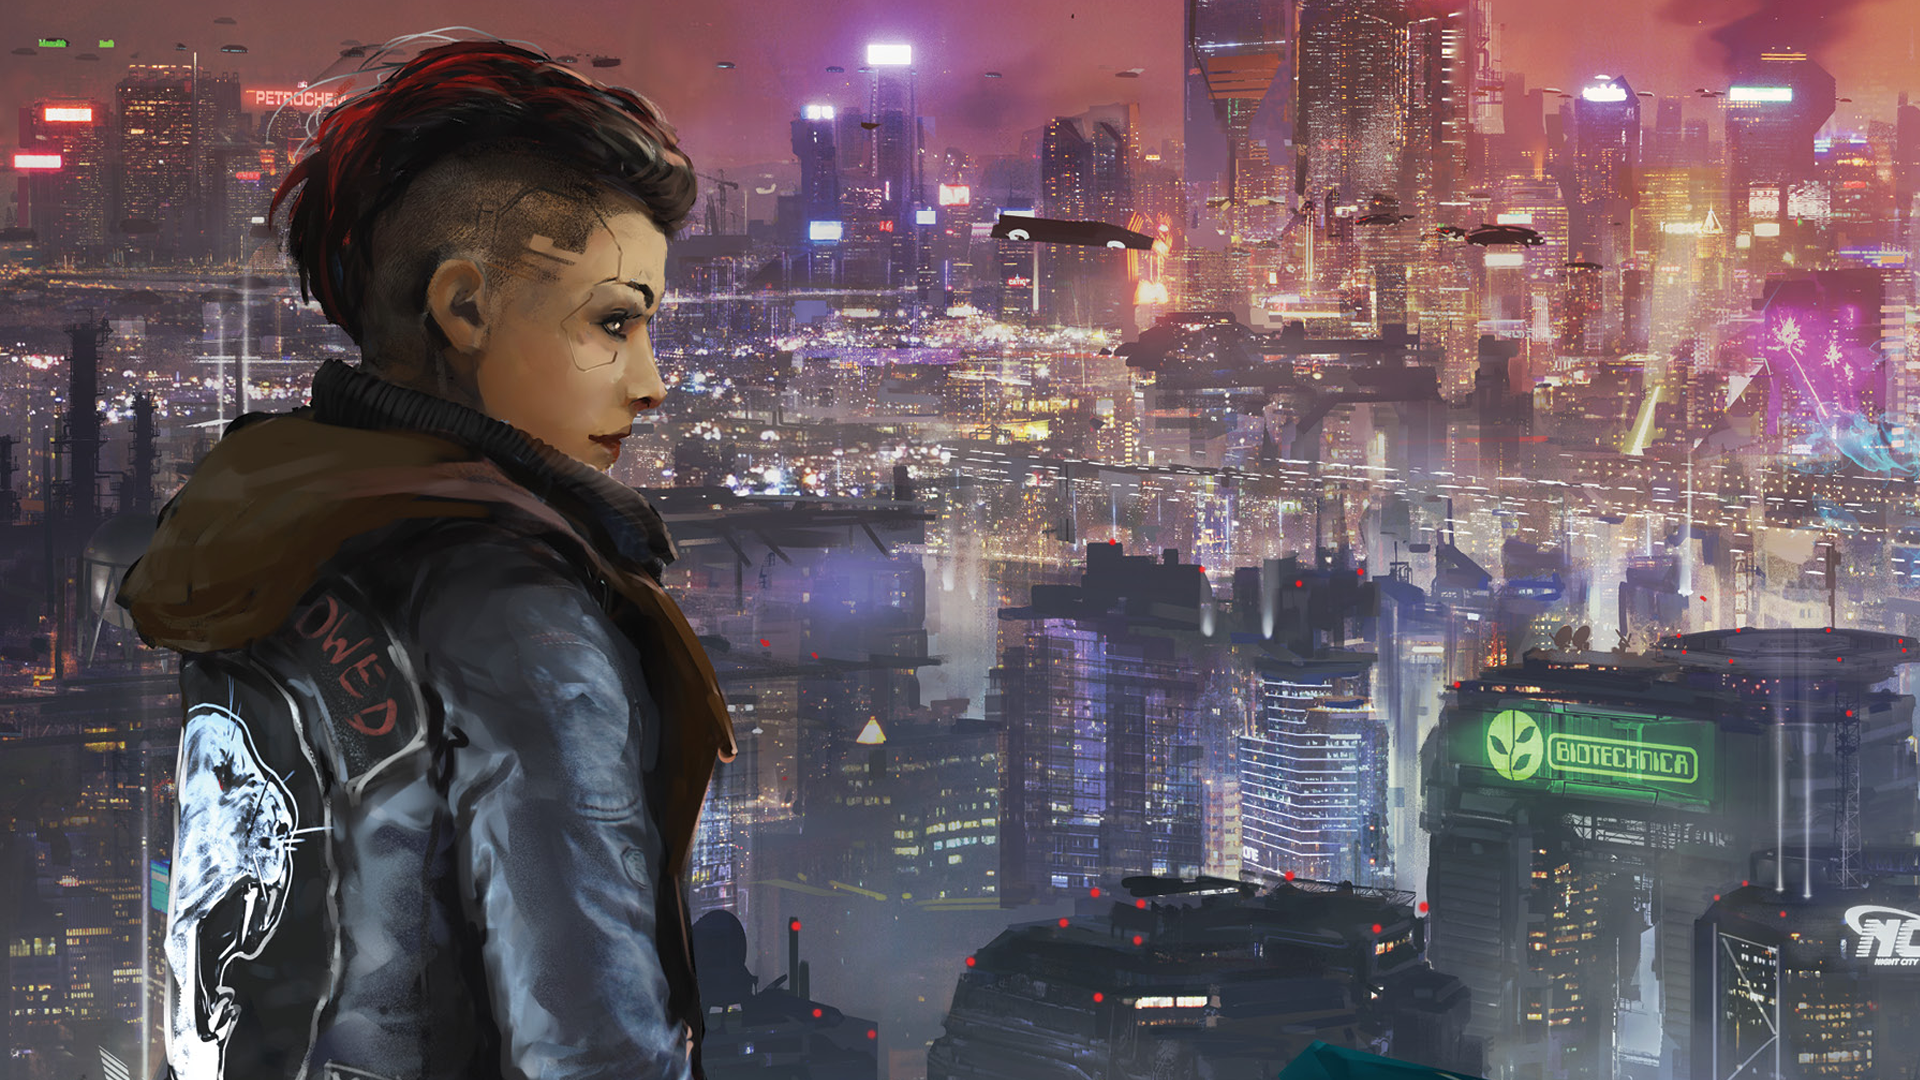 Image for Cyberpunk TRPG creator confirms that “there will be” Cyberpunk 2077 sourcebooks